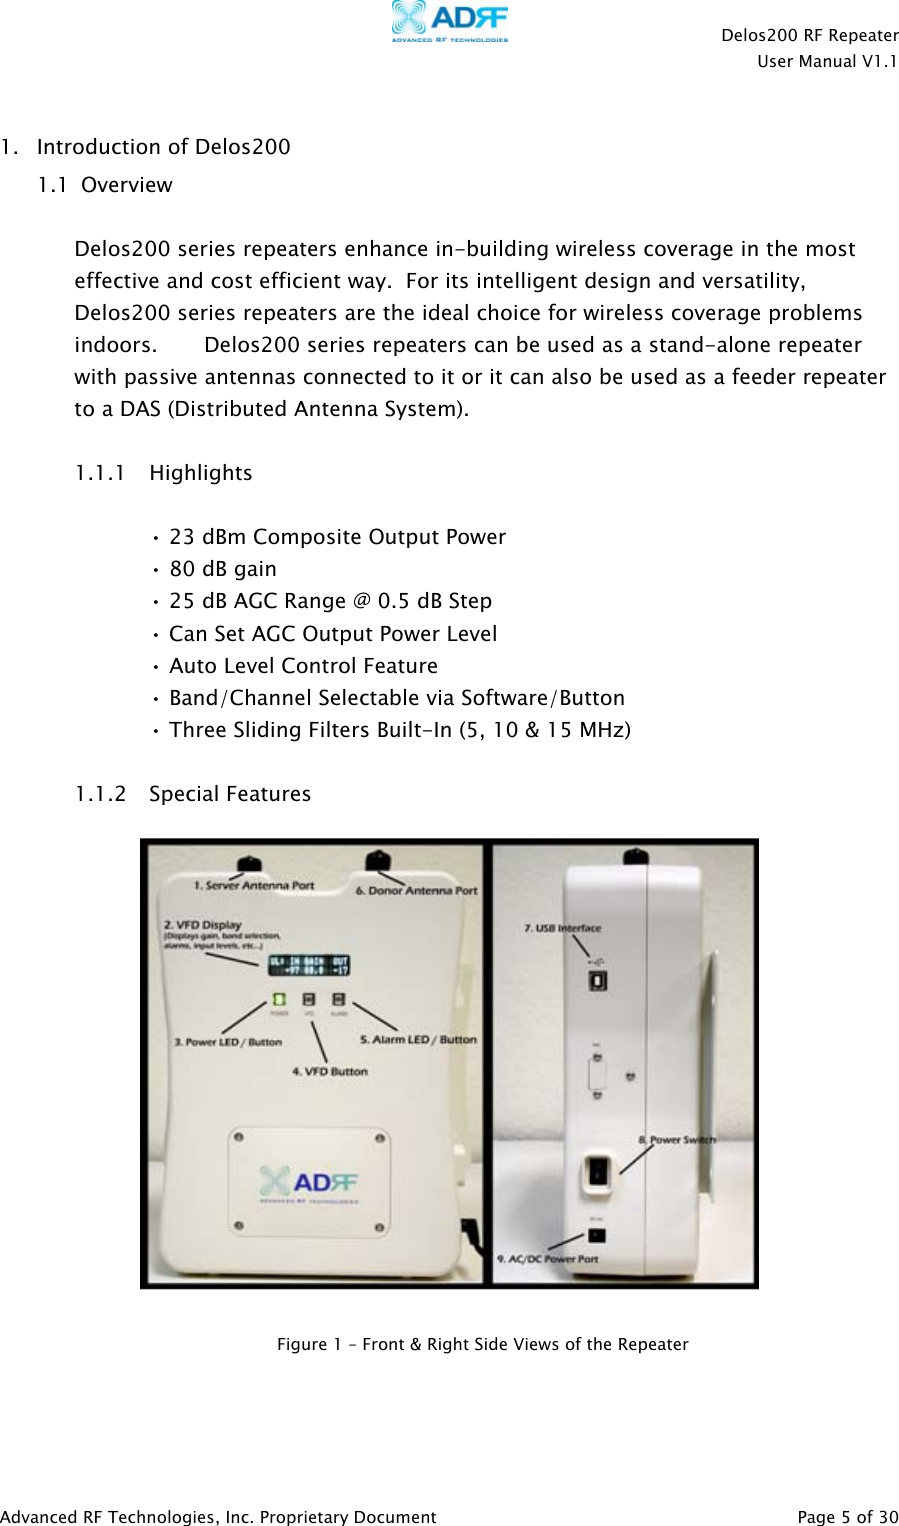    Delos200 RF Repeater  User Manual V1.1  Advanced RF Technologies, Inc. Proprietary Document   Page 5 of 30  1. Introduction of Delos200  1.1  Overview  Delos200 series repeaters enhance in-building wireless coverage in the most effective and cost efficient way.  For its intelligent design and versatility, Delos200 series repeaters are the ideal choice for wireless coverage problems indoors.       Delos200 series repeaters can be used as a stand-alone repeater with passive antennas connected to it or it can also be used as a feeder repeater to a DAS (Distributed Antenna System).  1.1.1 Highlights  • 23 dBm Composite Output Power • 80 dB gain • 25 dB AGC Range @ 0.5 dB Step • Can Set AGC Output Power Level • Auto Level Control Feature • Band/Channel Selectable via Software/Button  • Three Sliding Filters Built-In (5, 10 &amp; 15 MHz)  1.1.2 Special Features      Figure 1 – Front &amp; Right Side Views of the Repeater 